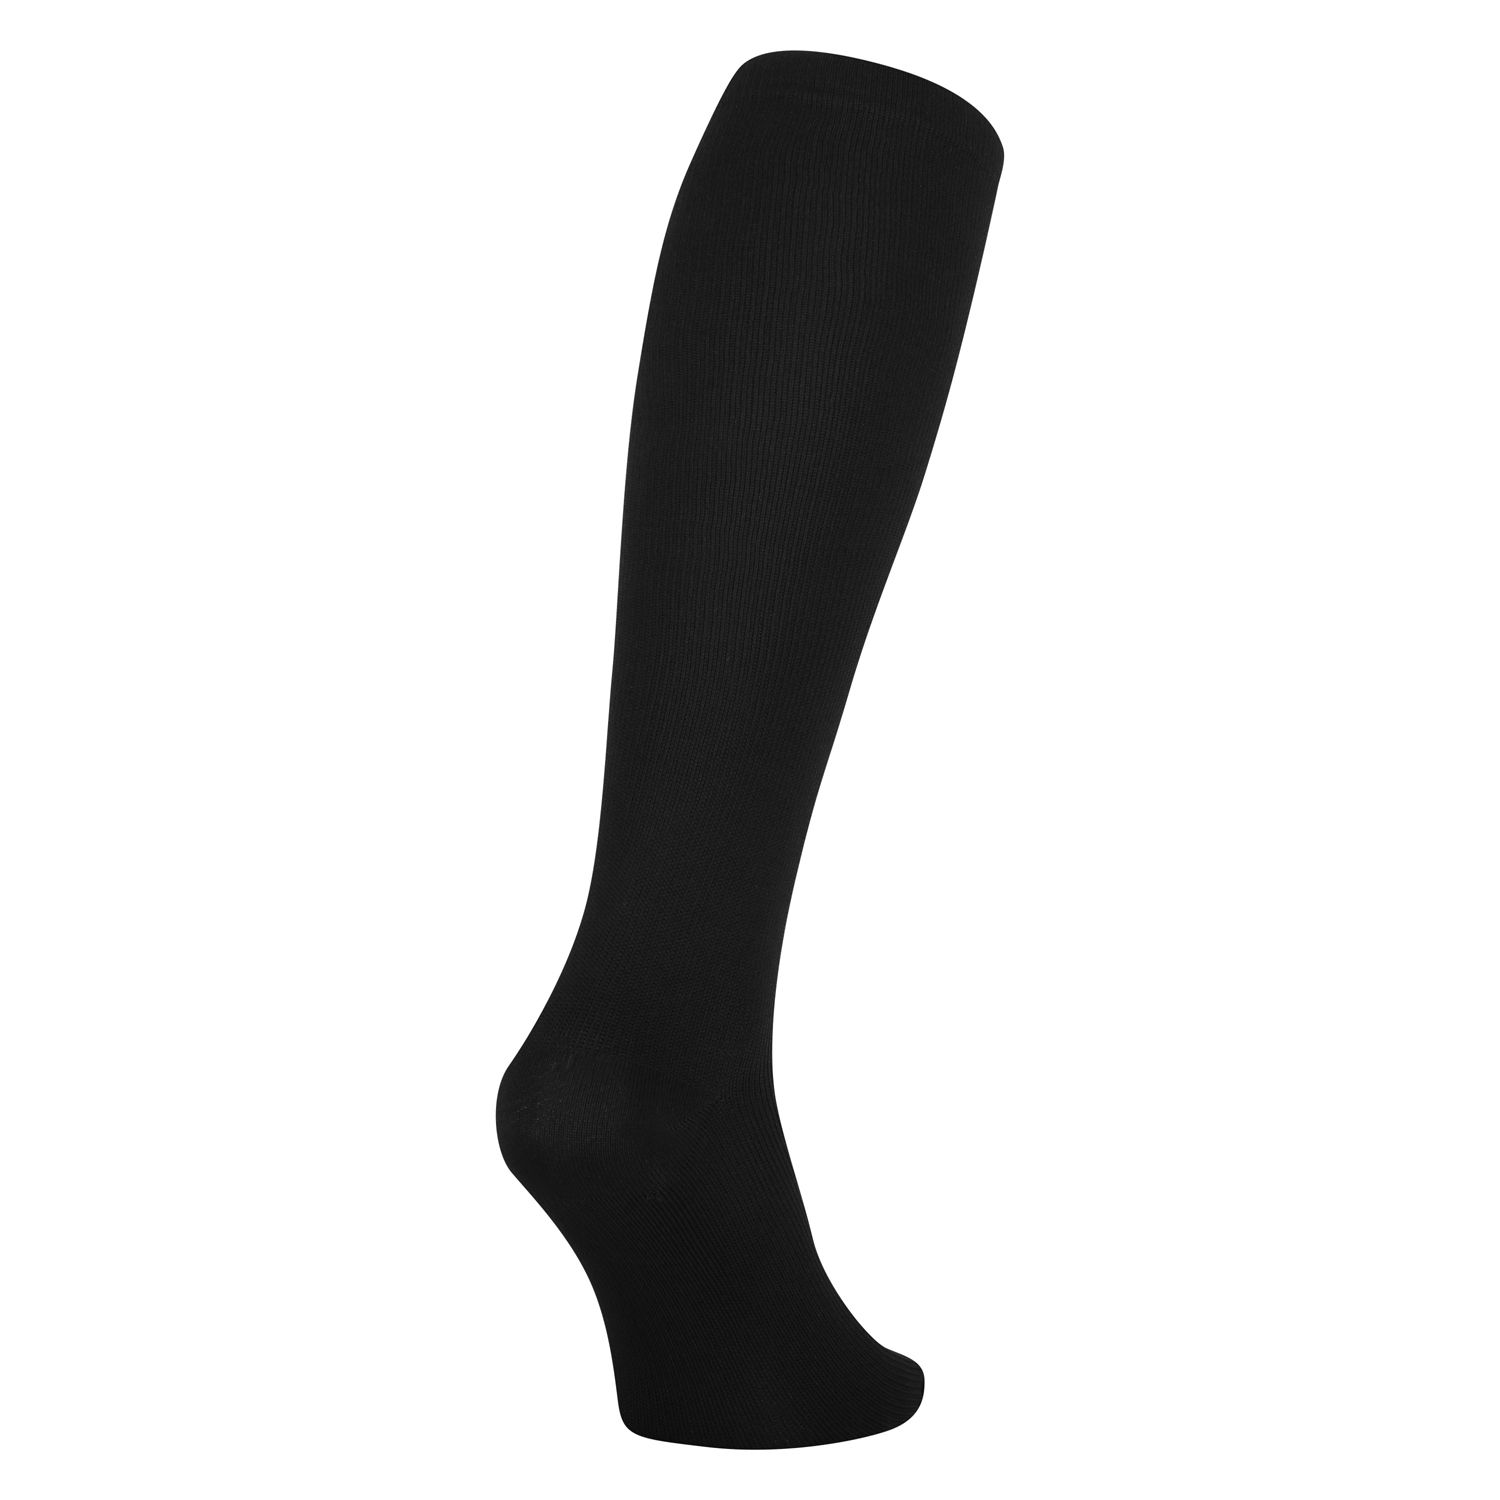 one pair of black support sotckings